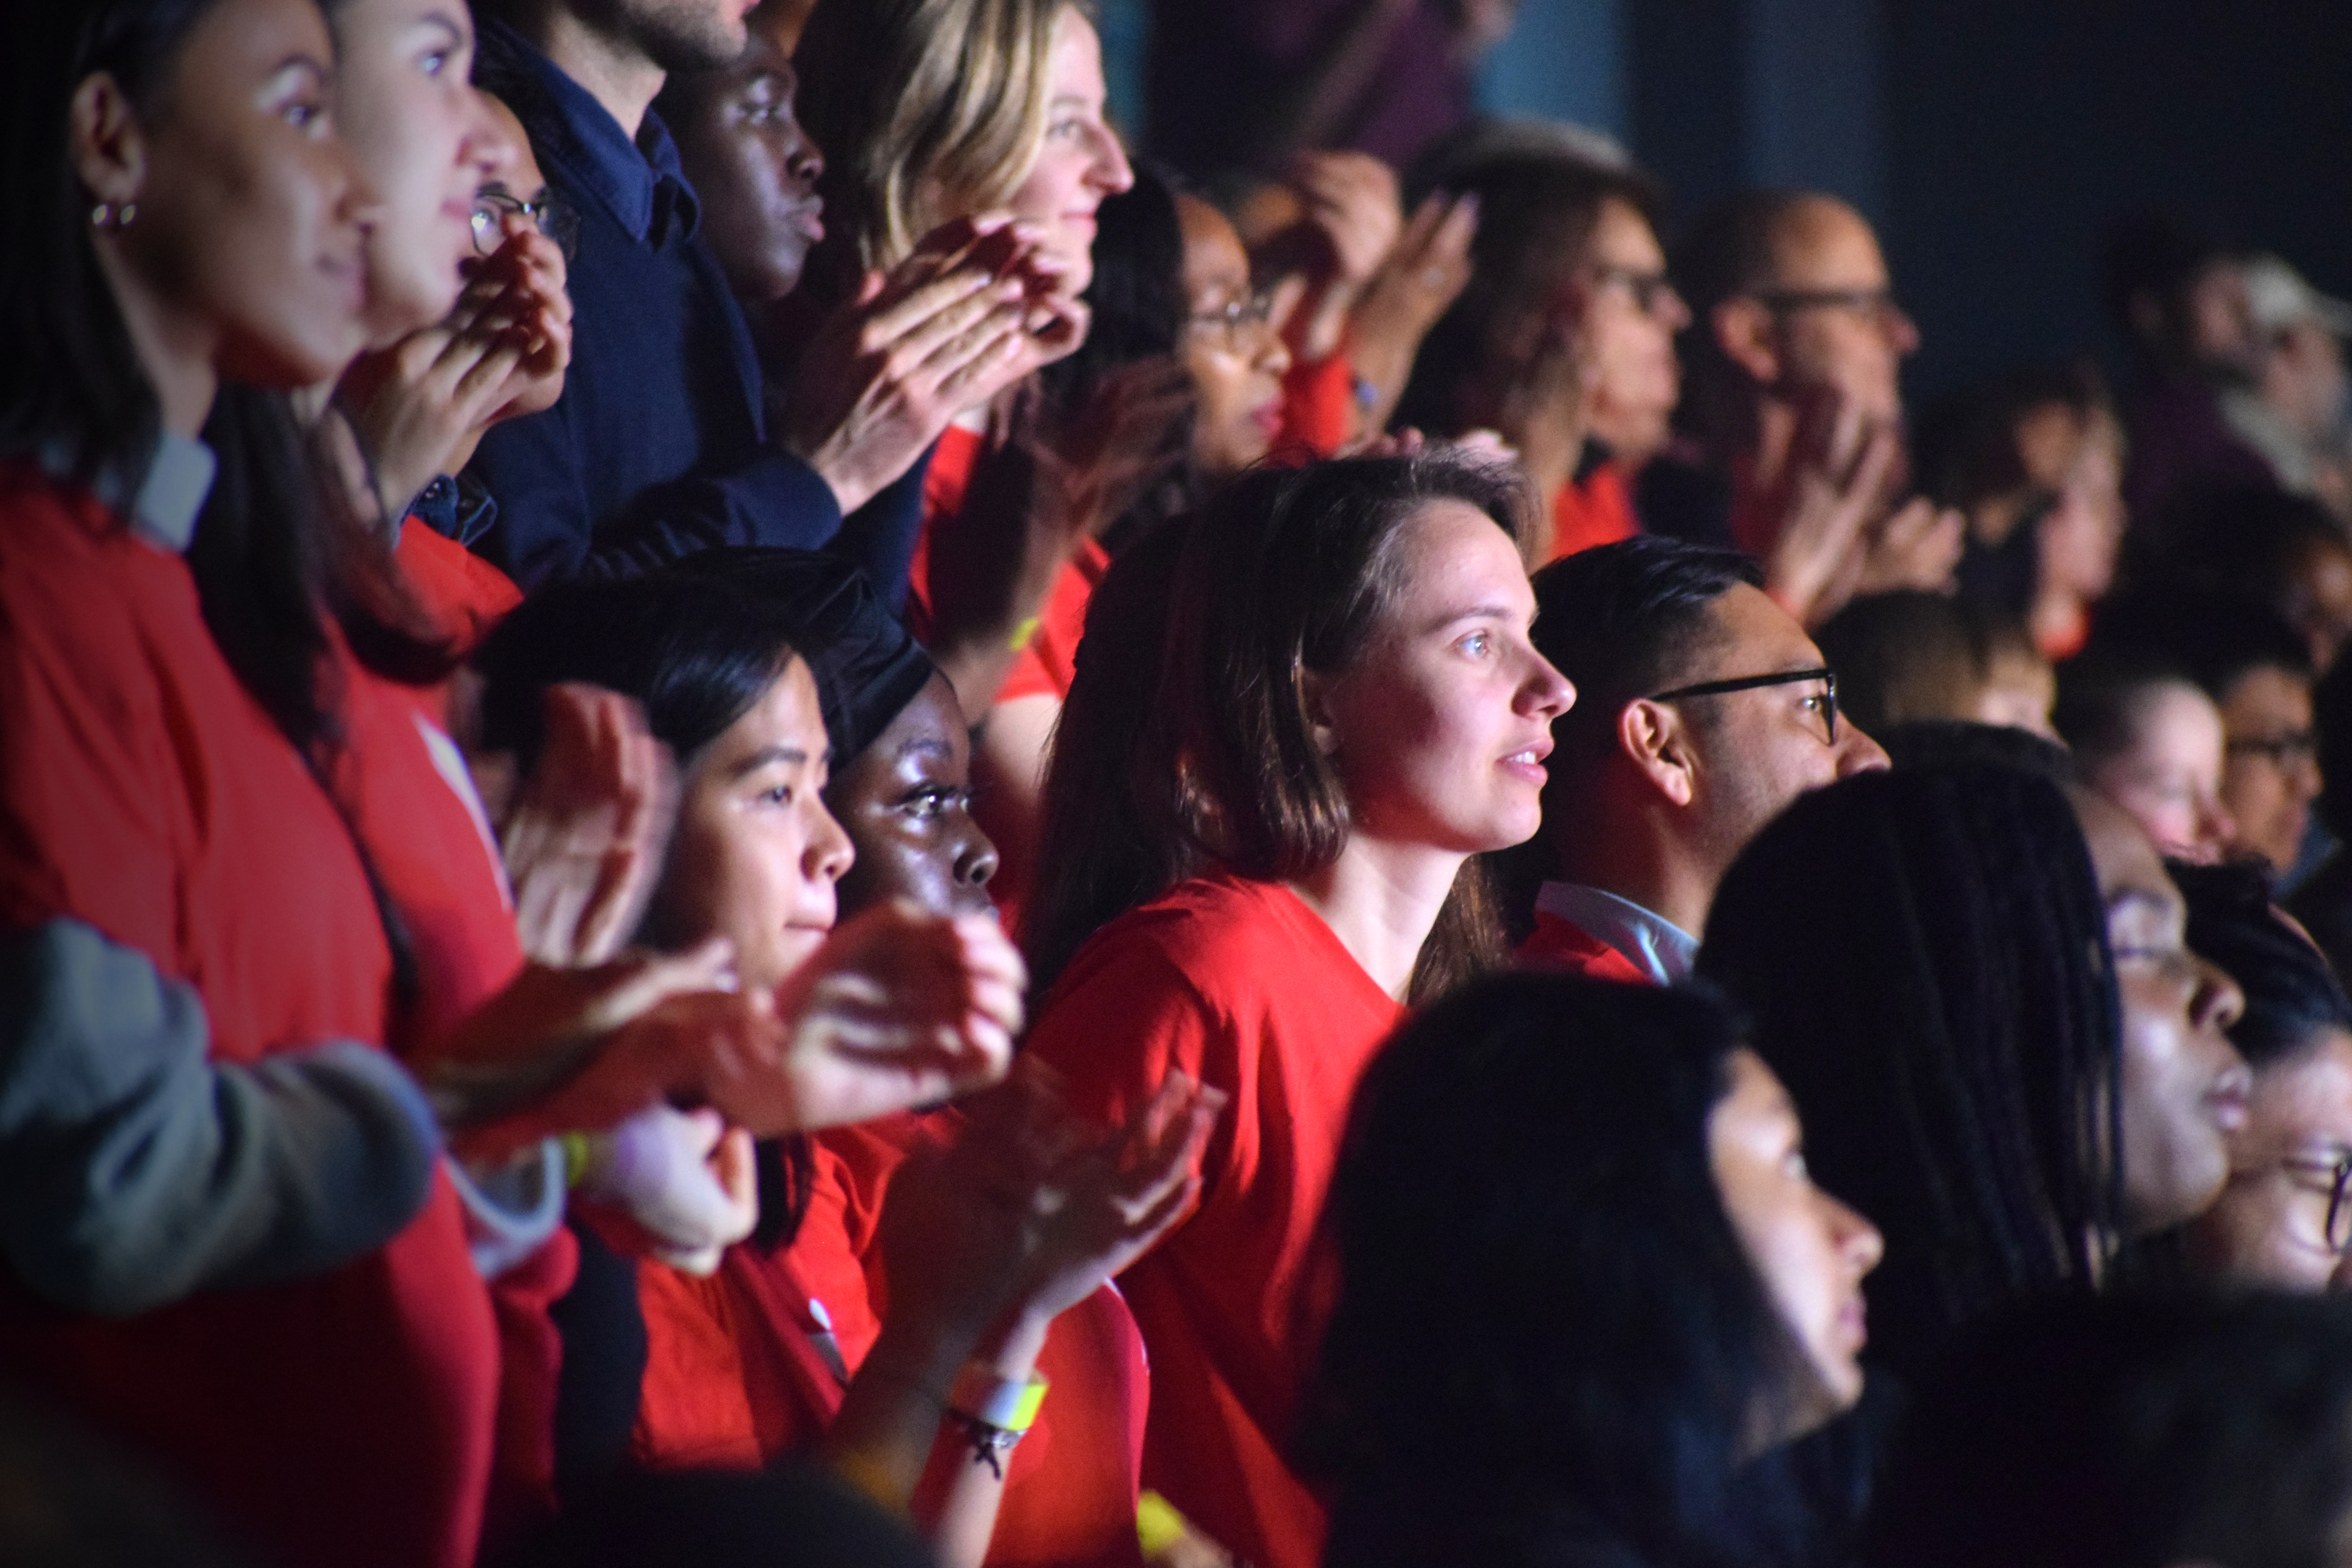 Youth Diocese of Westminster adults in attendance at Flame 2019 (Photo: WYM)